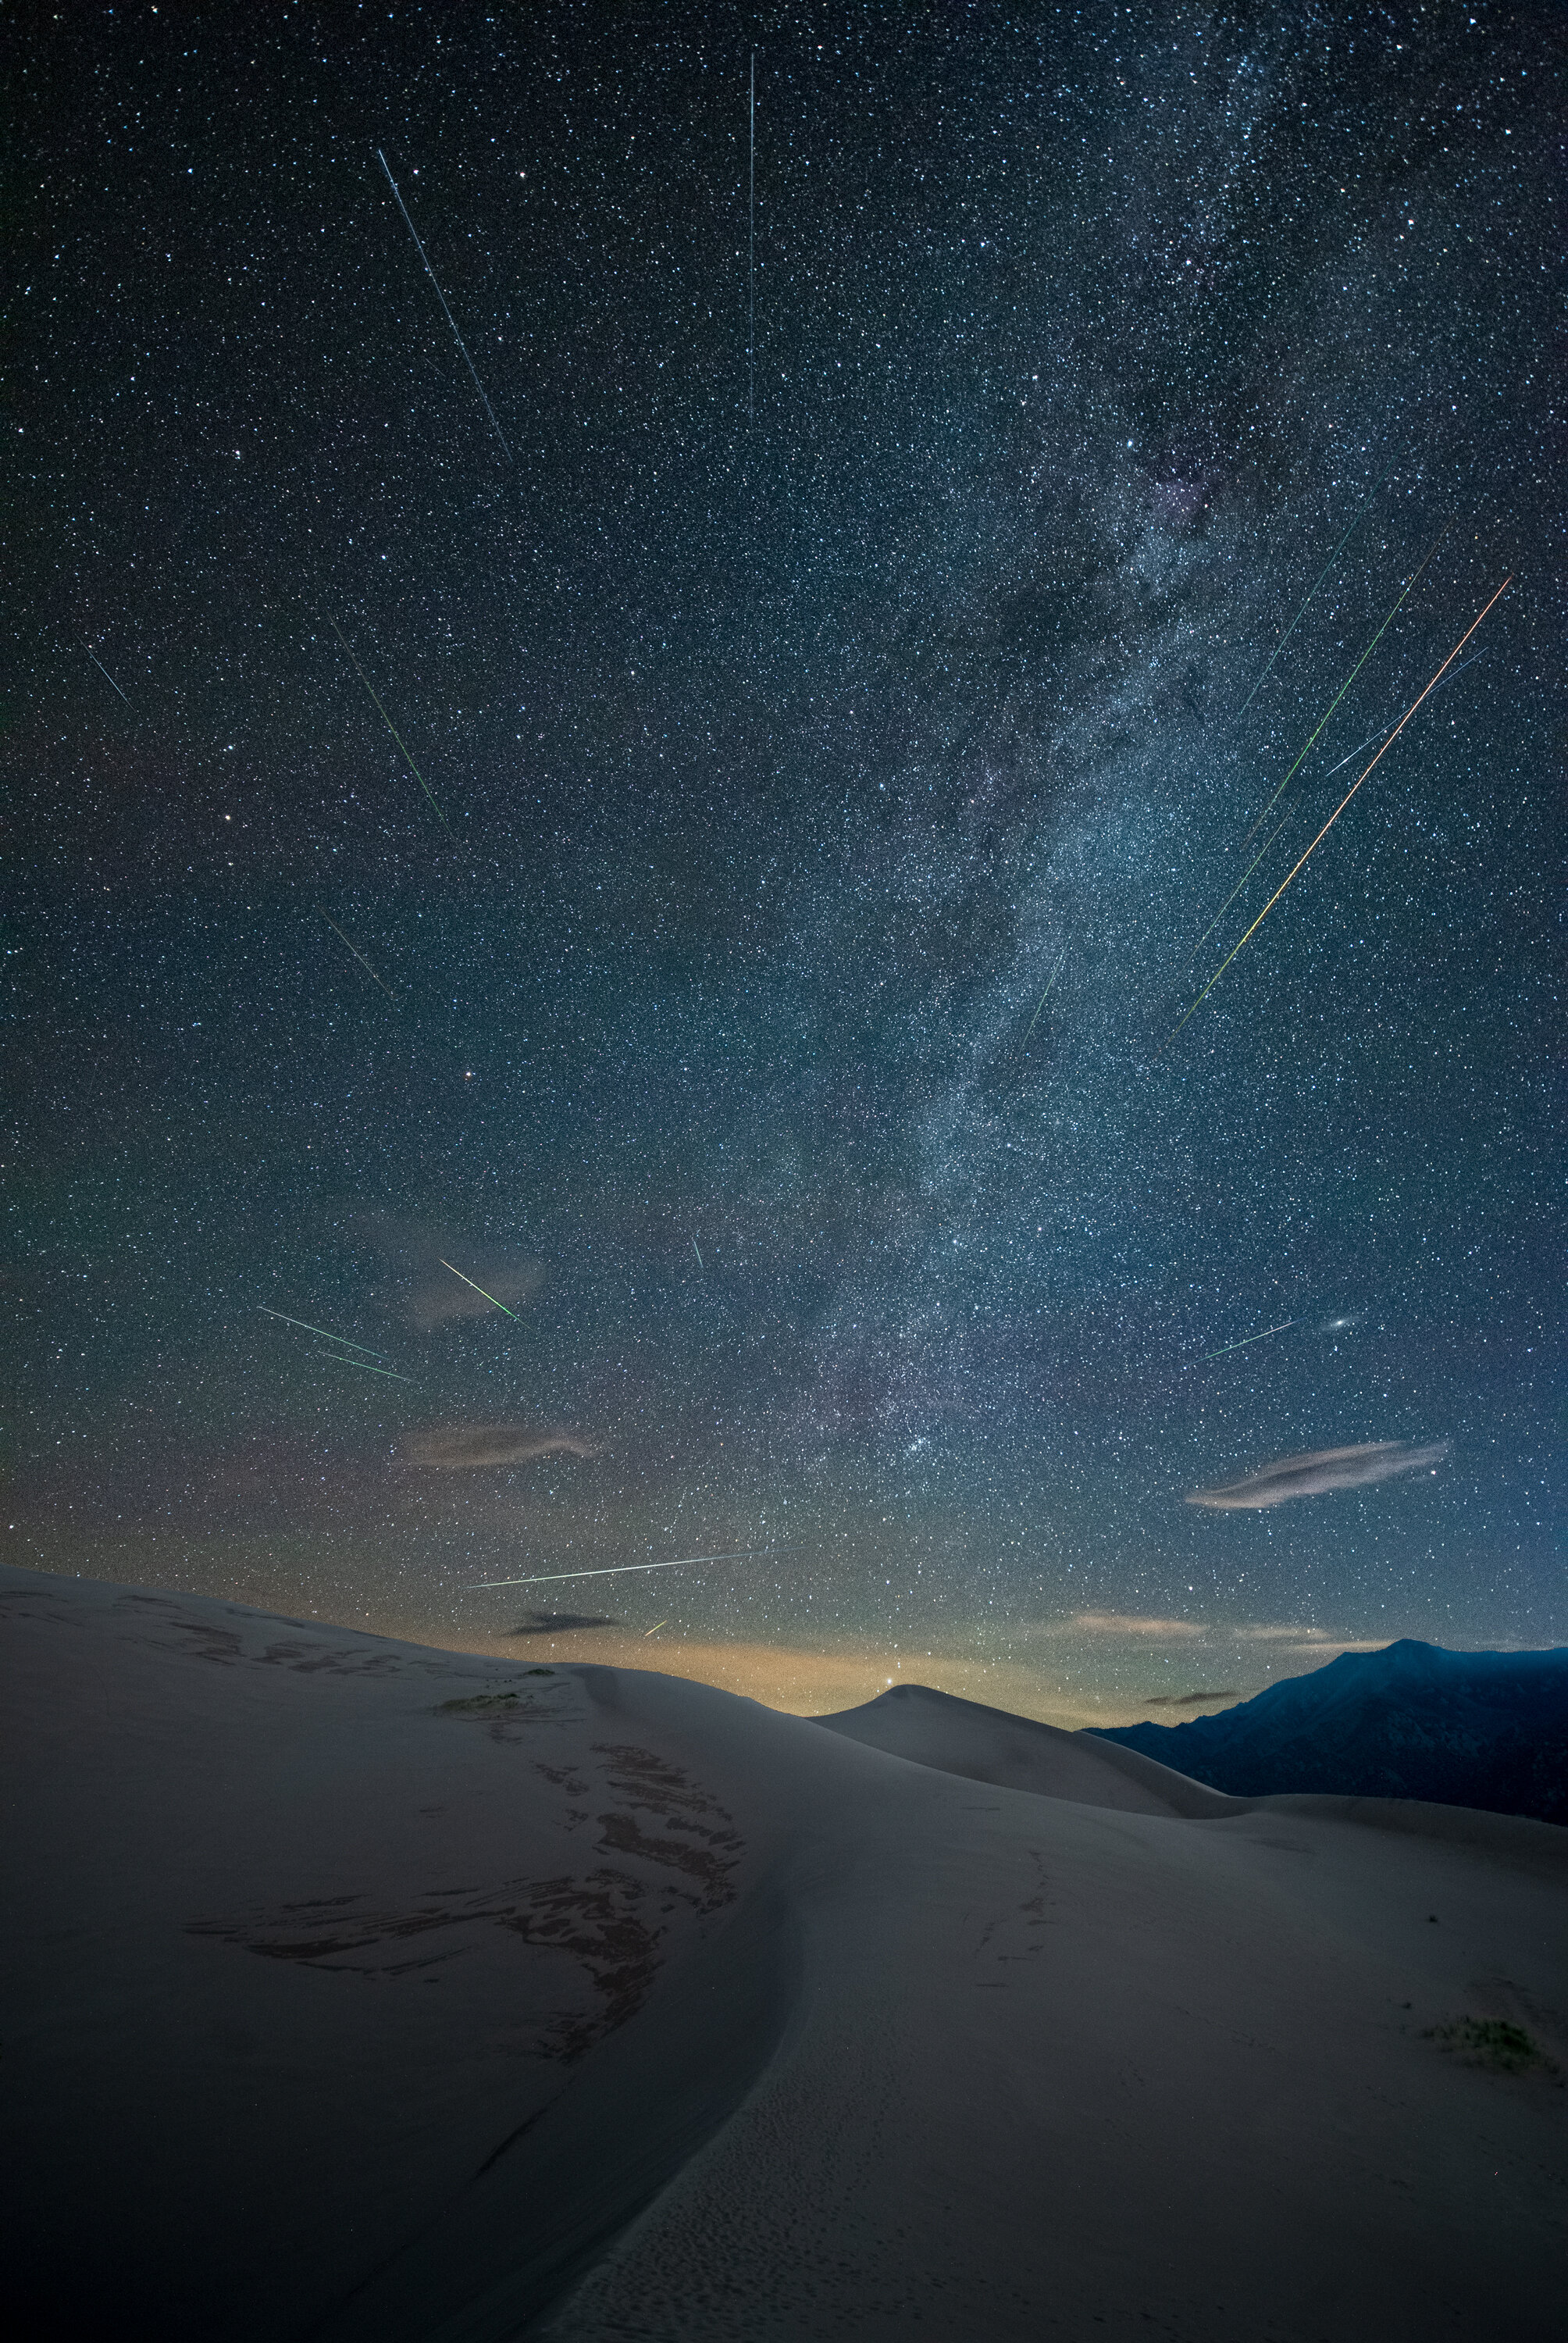 Great Balls of Fire, Part 3: How to Process a Meteor Shower